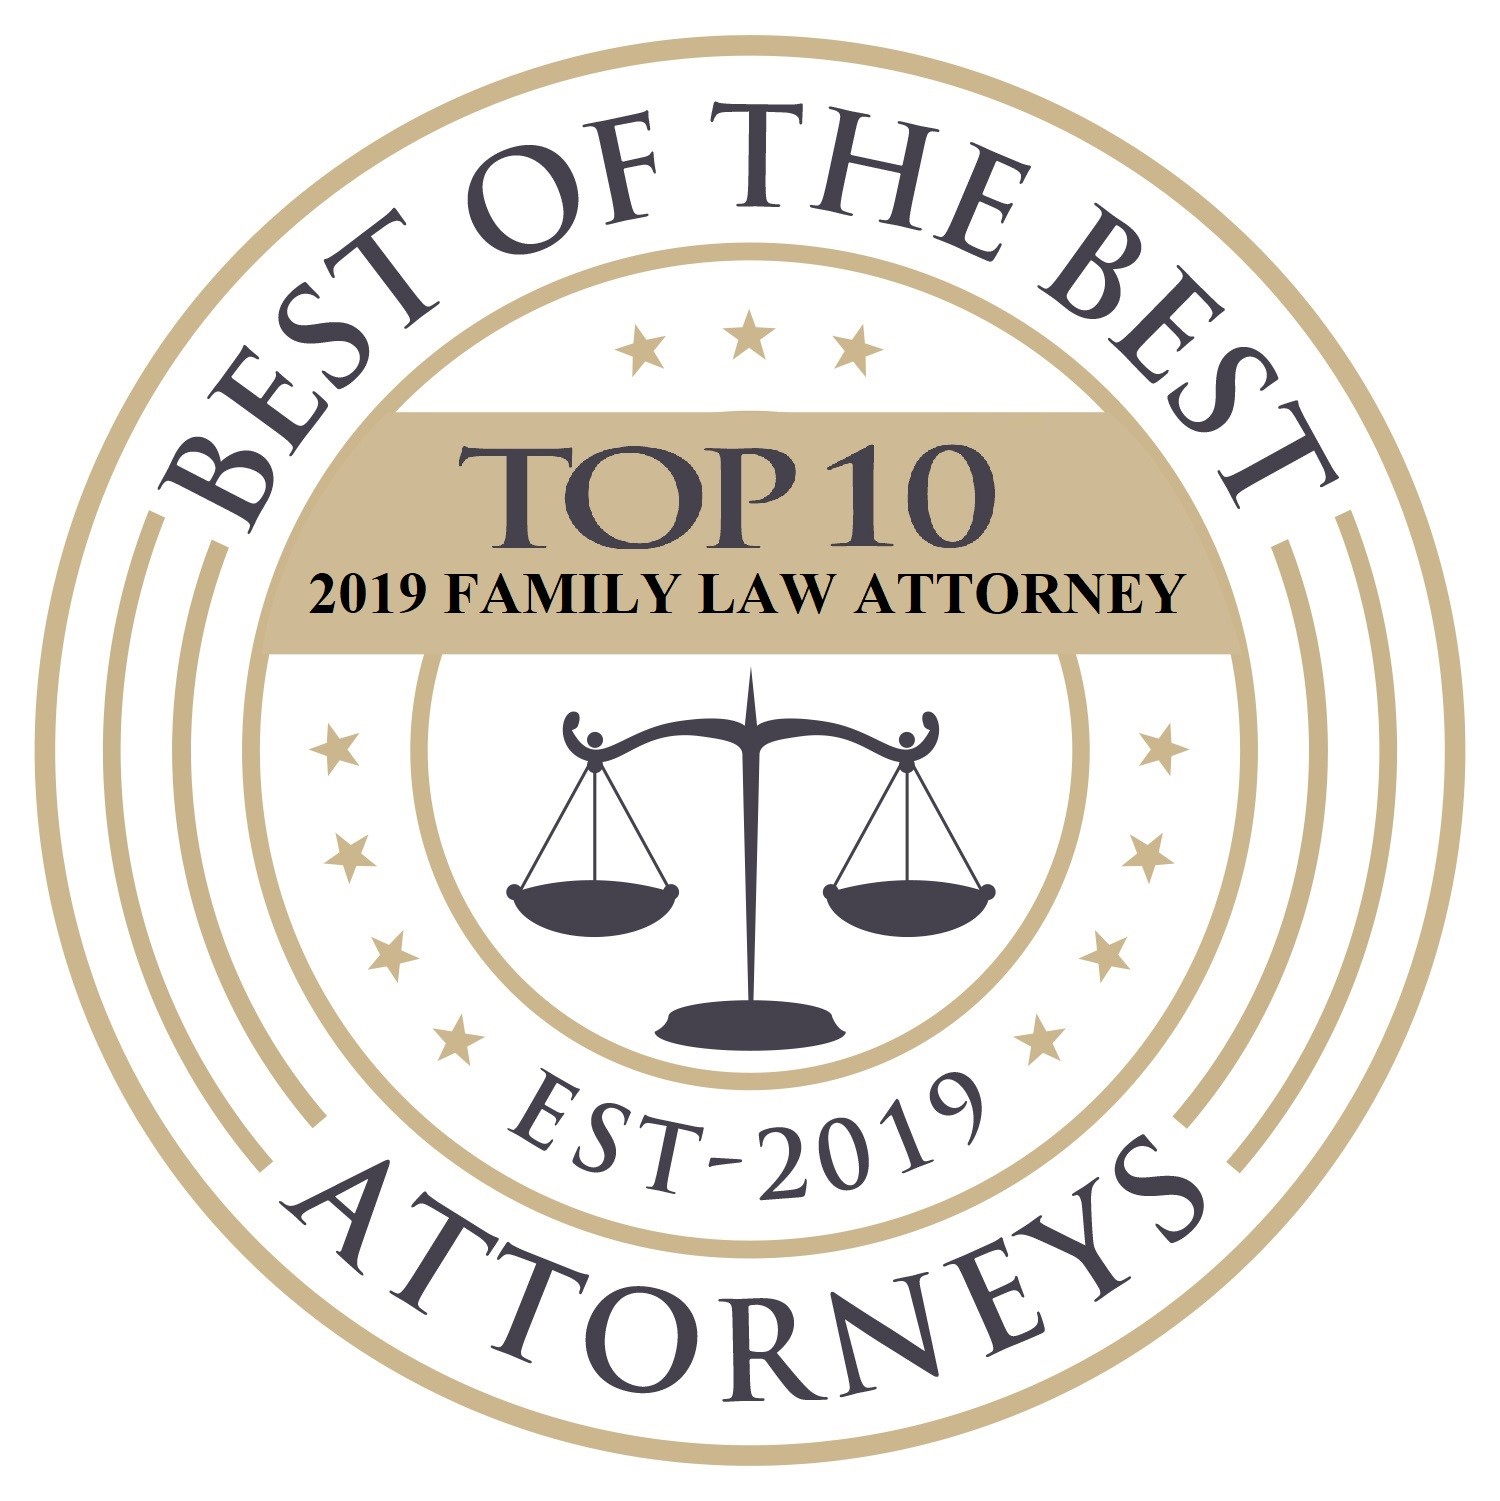 Best Of The Best Attorneys | Top 10 2019 Family Law Attorney | EST-2019